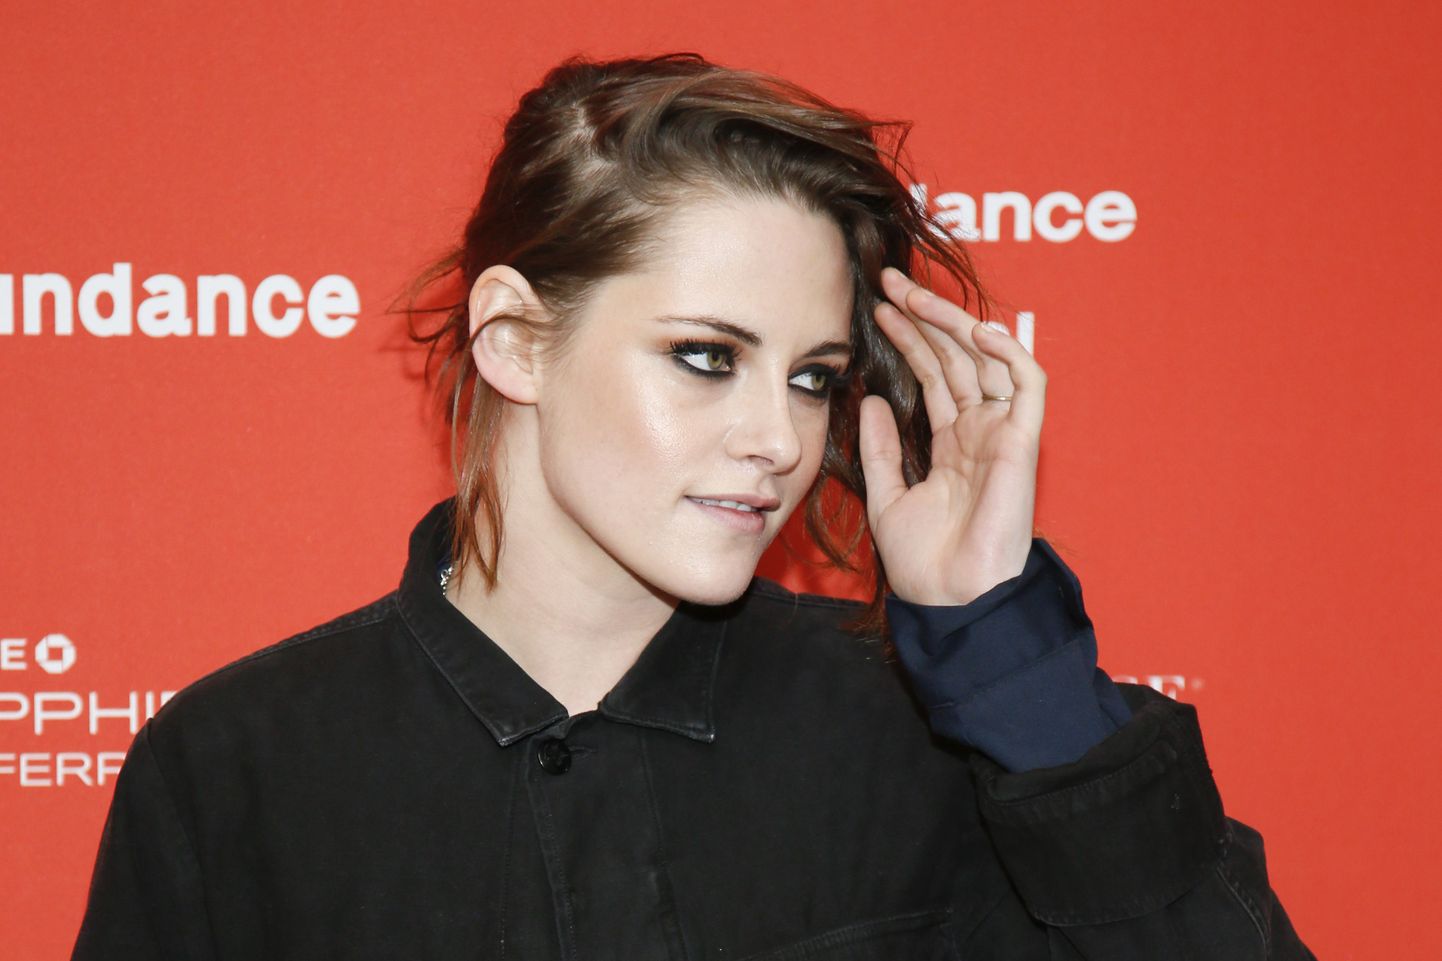 Actress Kristen Stewart poses at the premiere of "Certain Women" during the 2016 Sundance Film Festival on Sunday, Jan. 24, 2016, in Park City, Utah. (Photo by Danny Moloshok/Invision/AP)